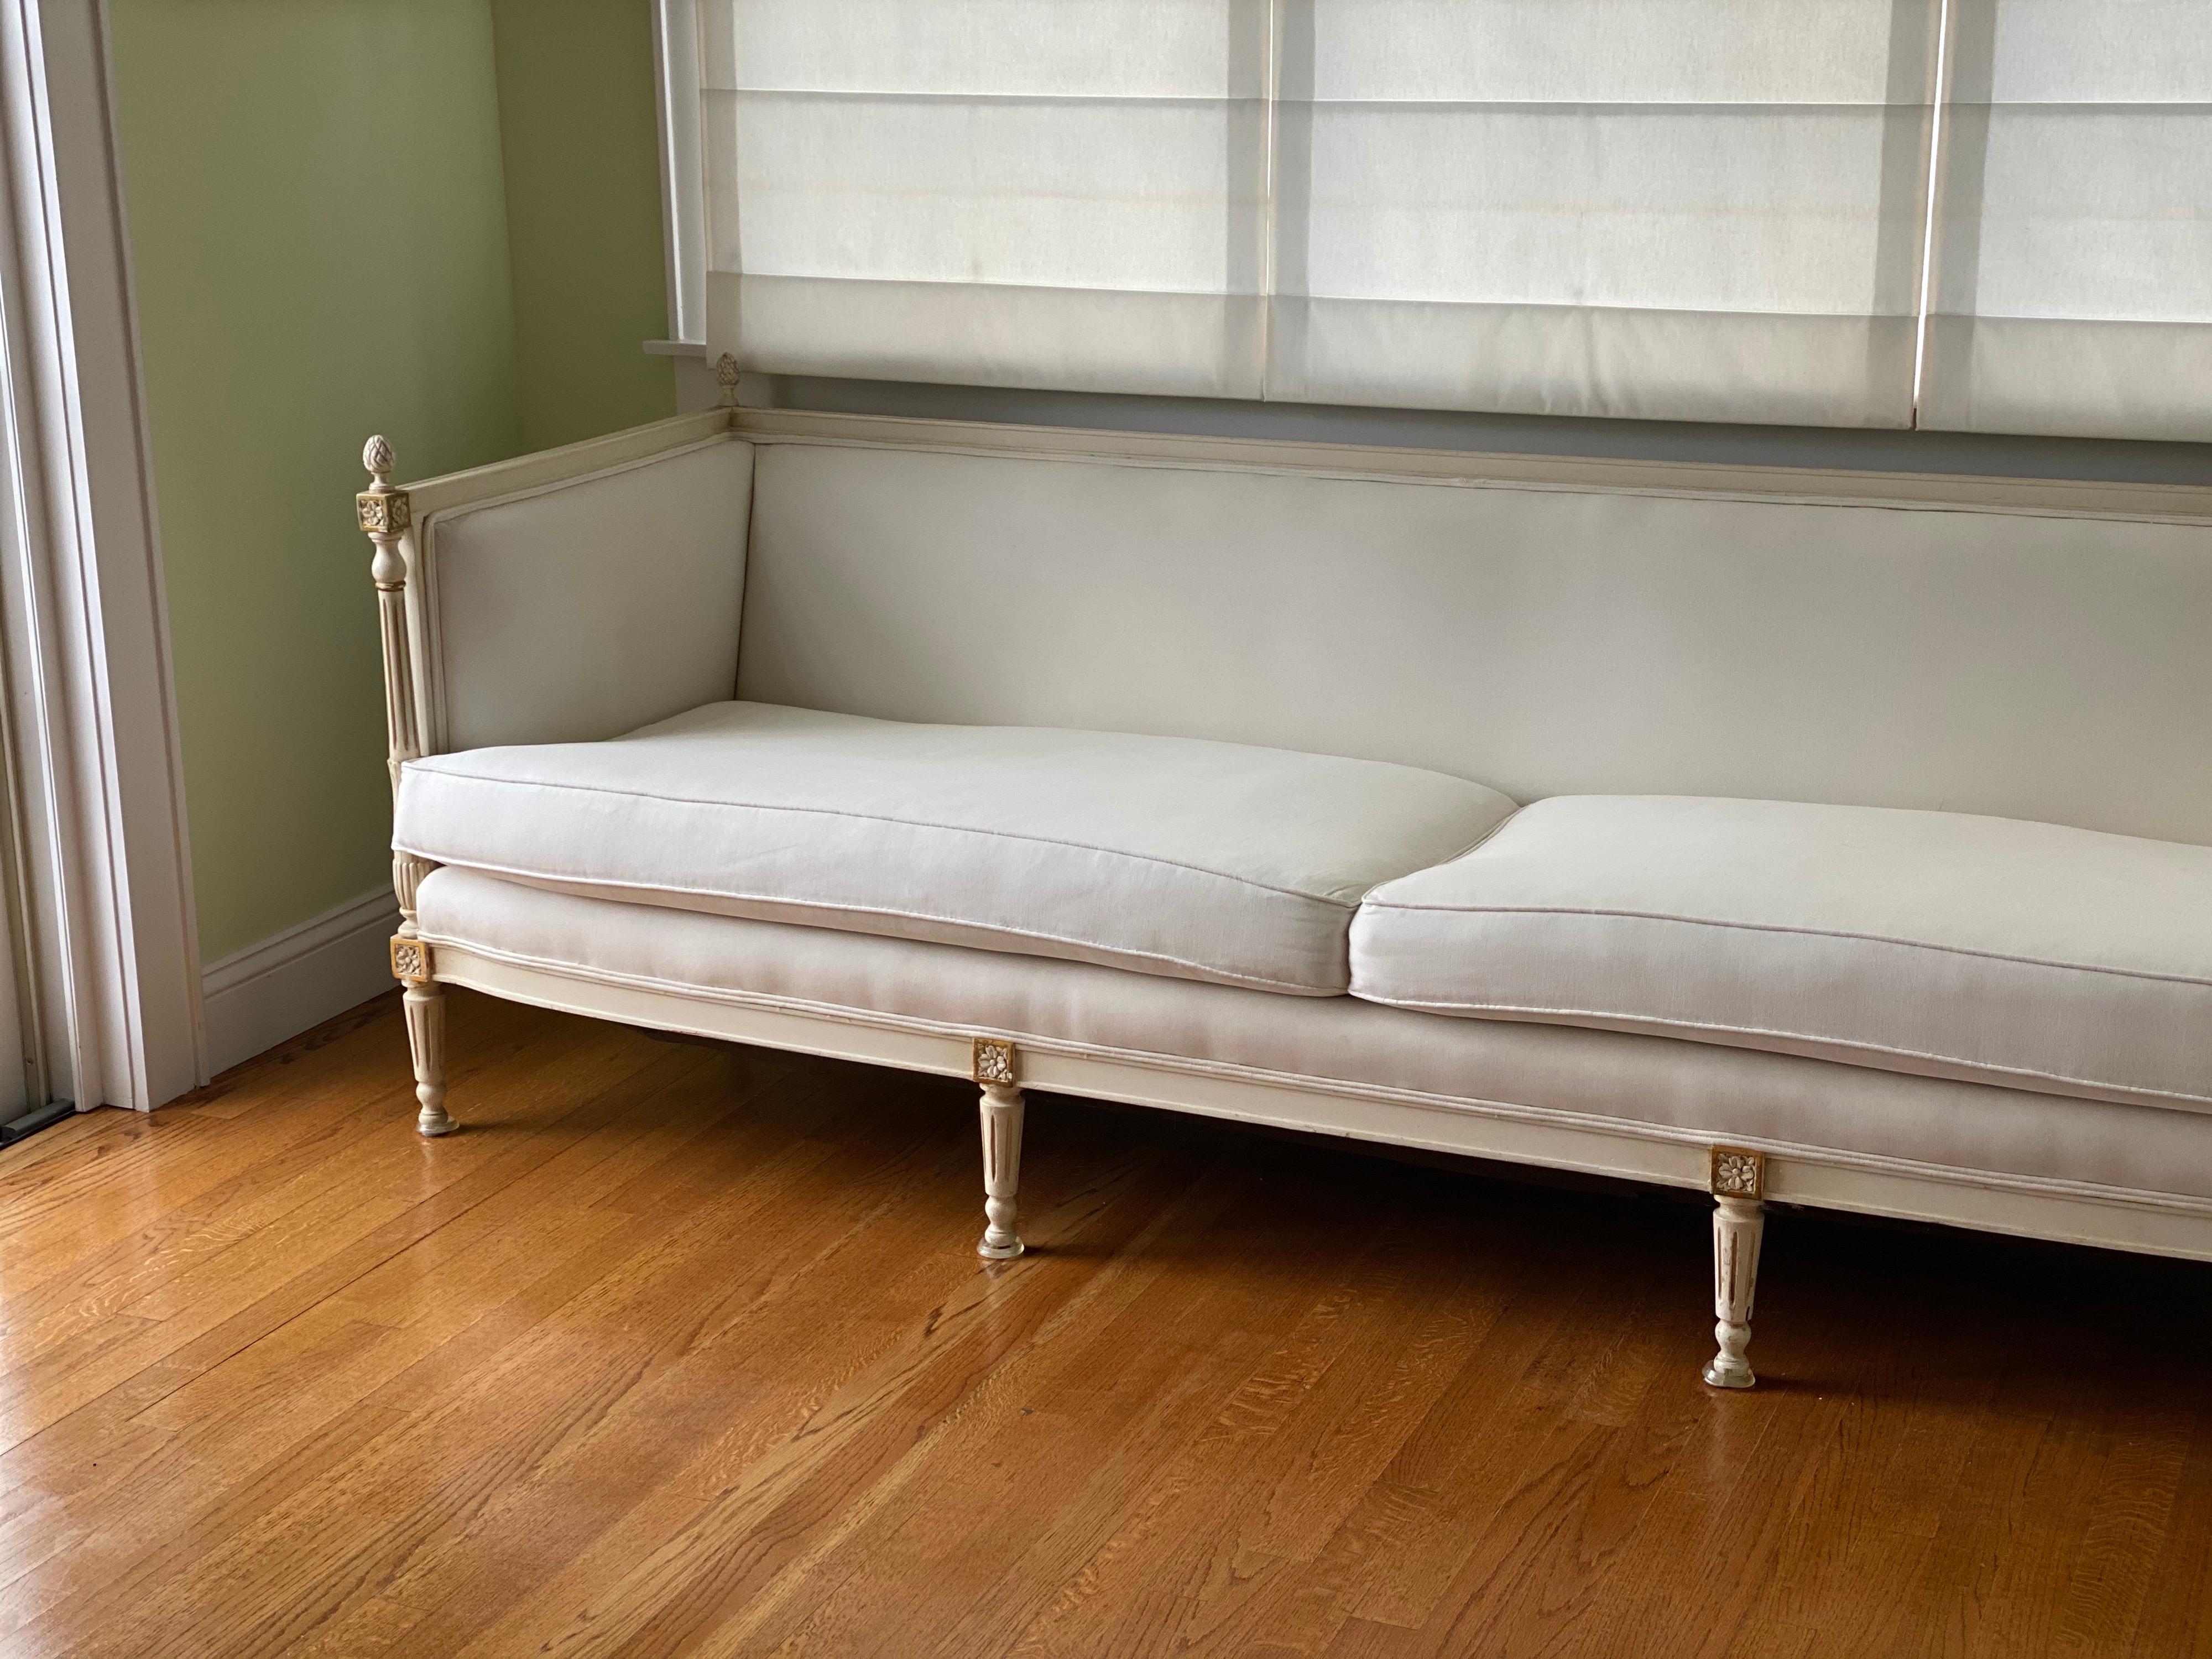 Swedish Gustavian style painted extra long sofa/settee, 20th century.
Classic daybed sofa design in an extra spacious width. Upholstered in white cotton fabric. Overall very good condition, light soiling on the arm upholstery but could be used